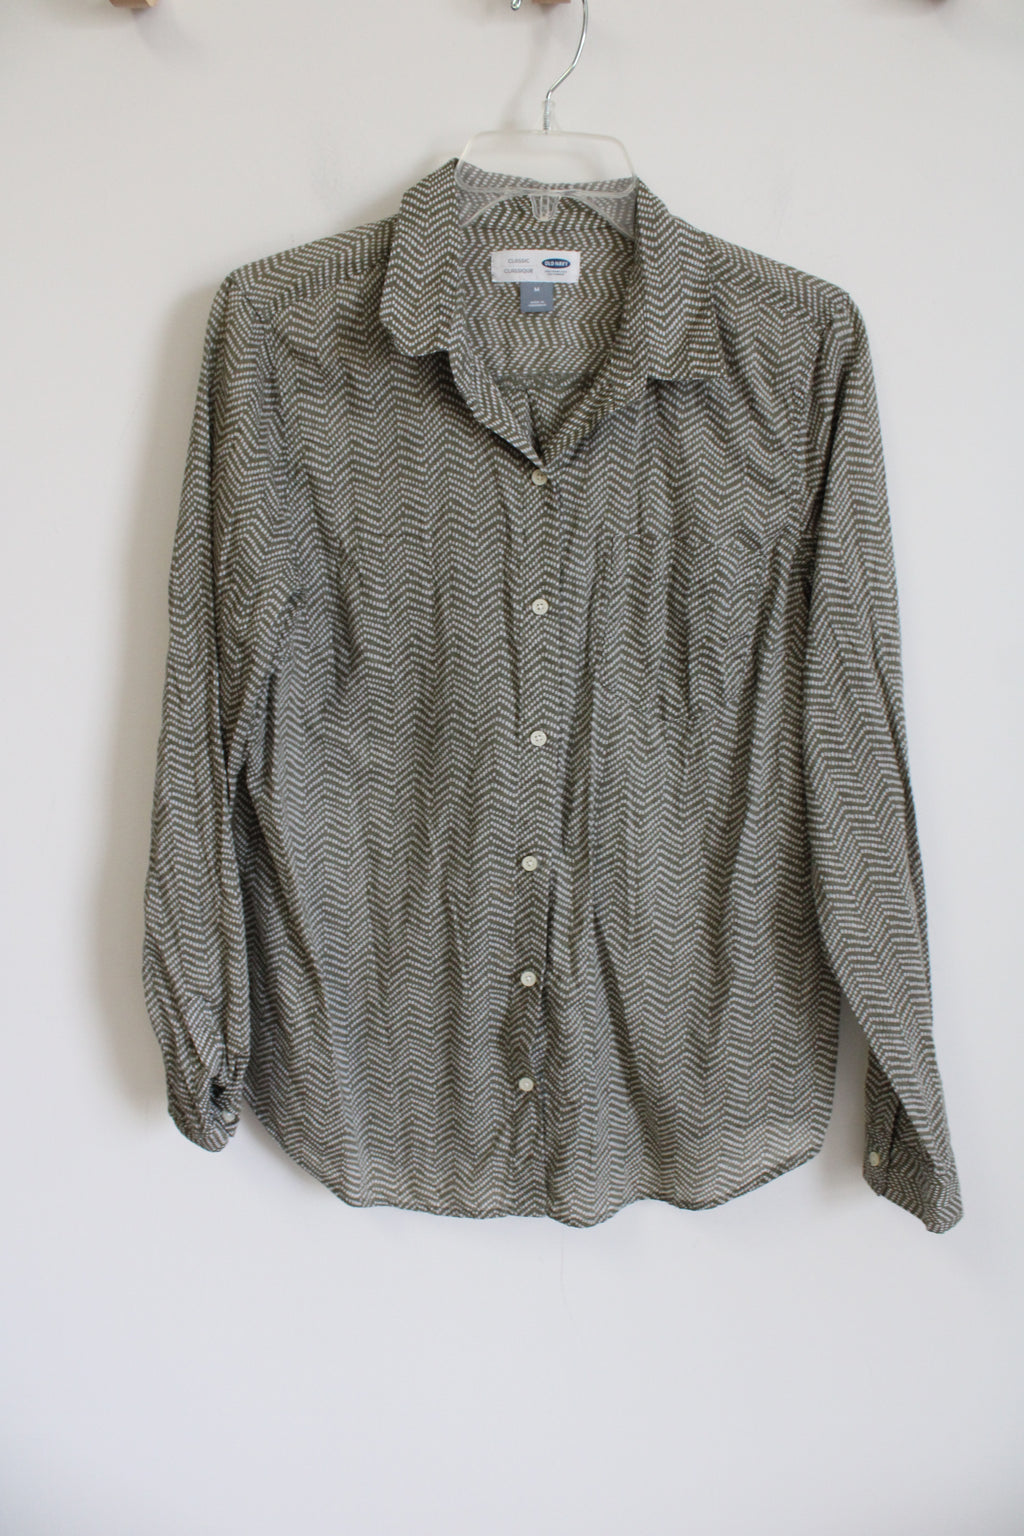 Old Navy Classic Fit Green White Speckled Lightweight Top | M